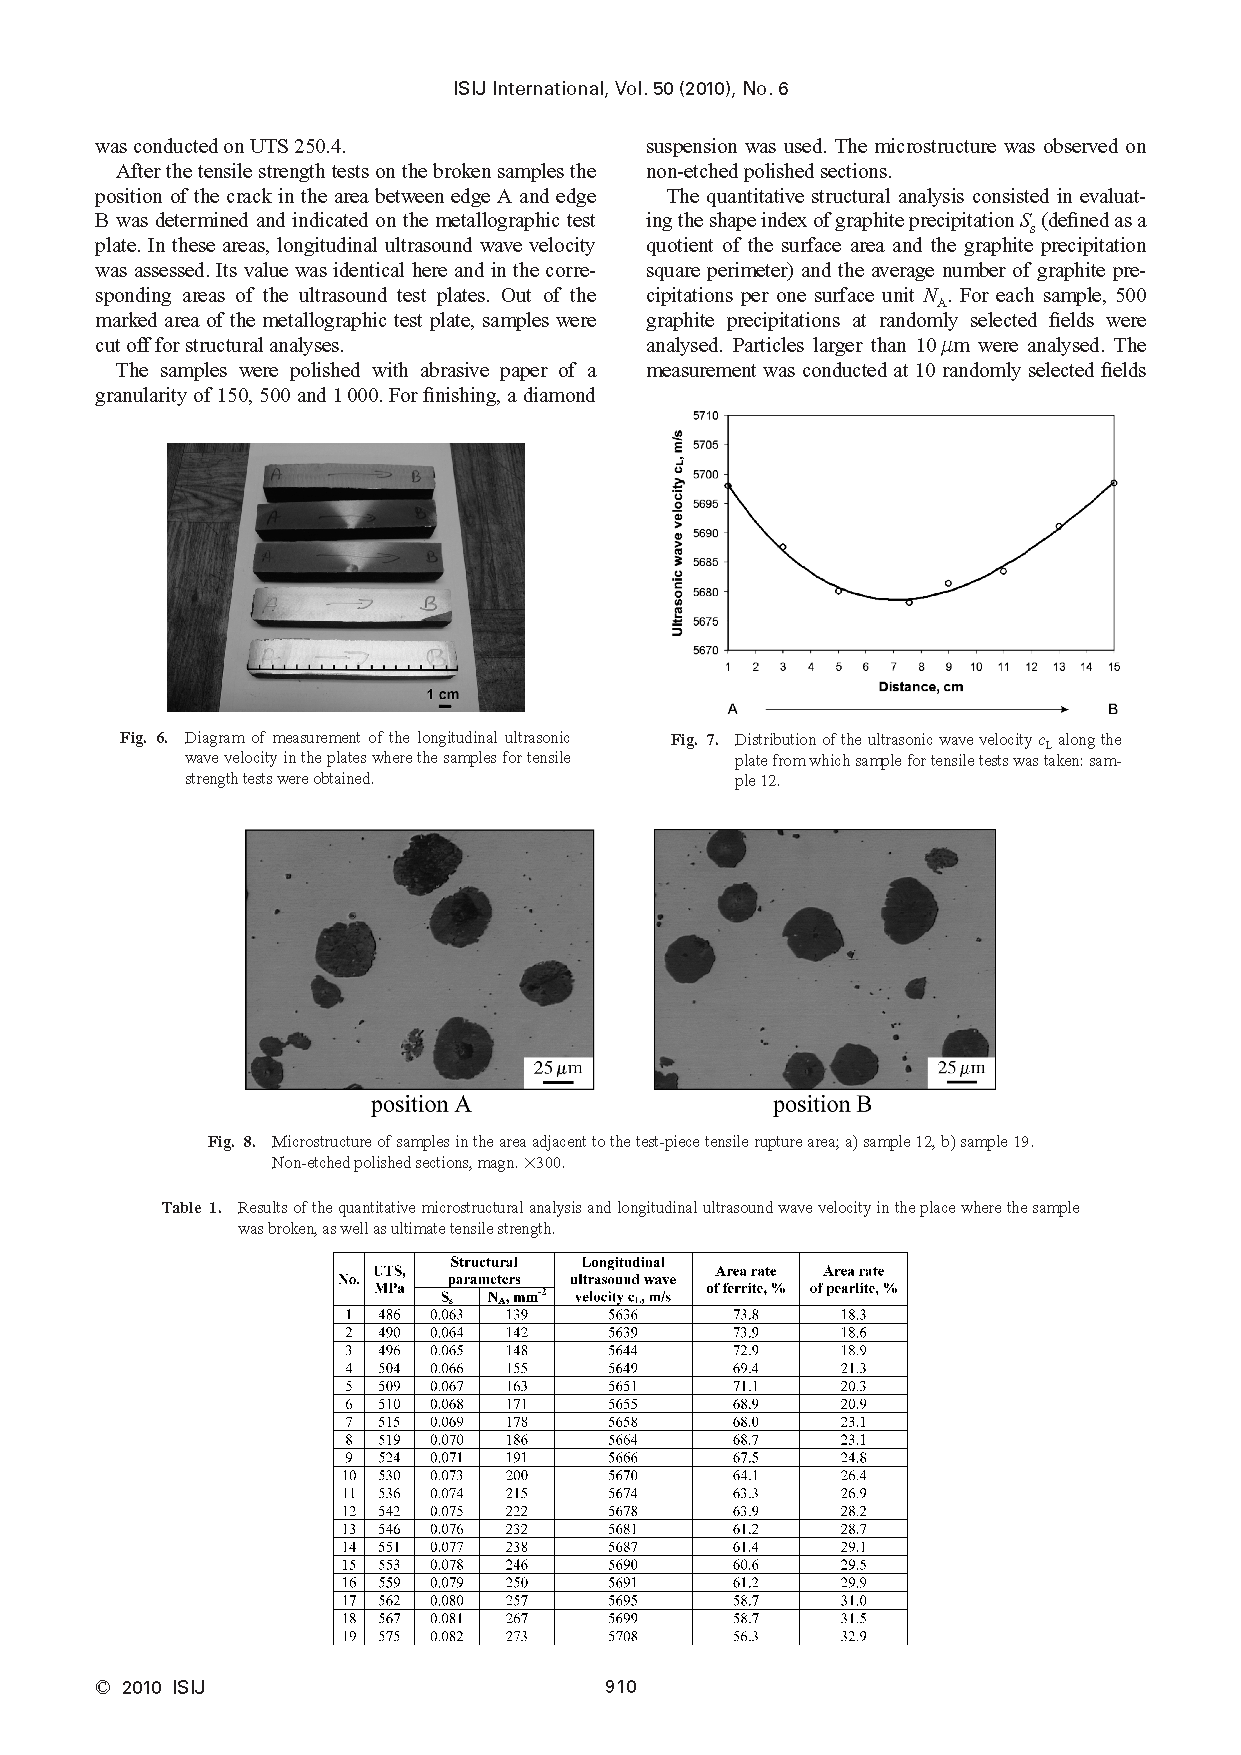 Quality Control by Means of Ultrasonic in the Production of Ductile Iron(图5)